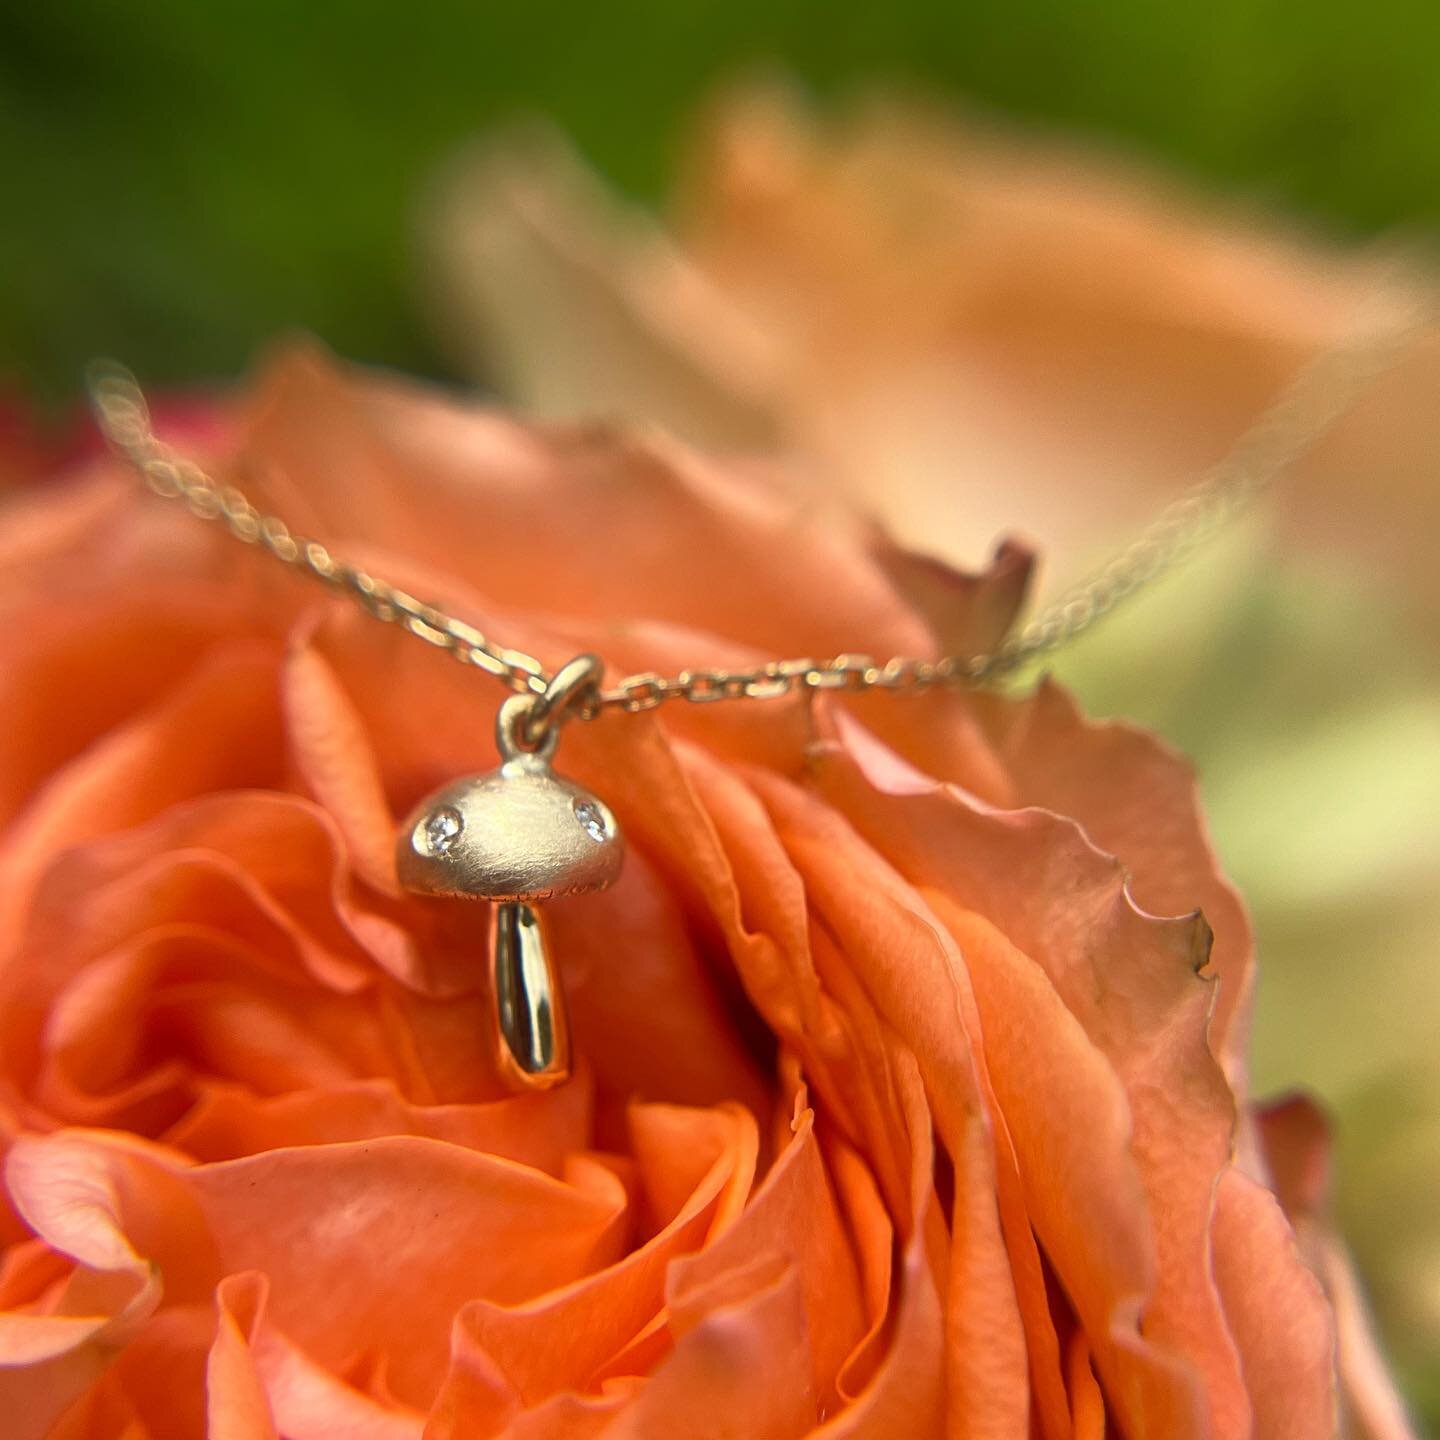 🍄 🍃 🌸 🍃🍄
new one of a kind handmade mushroom charm! 14k solid gold with 4 lab diamonds flush set in the cap. perfect for the nature enthusiast, chef/foodie, or Alice in wonderland lover in your life. 

#thegoldenpeach #jewelry #gold #mushroom #c